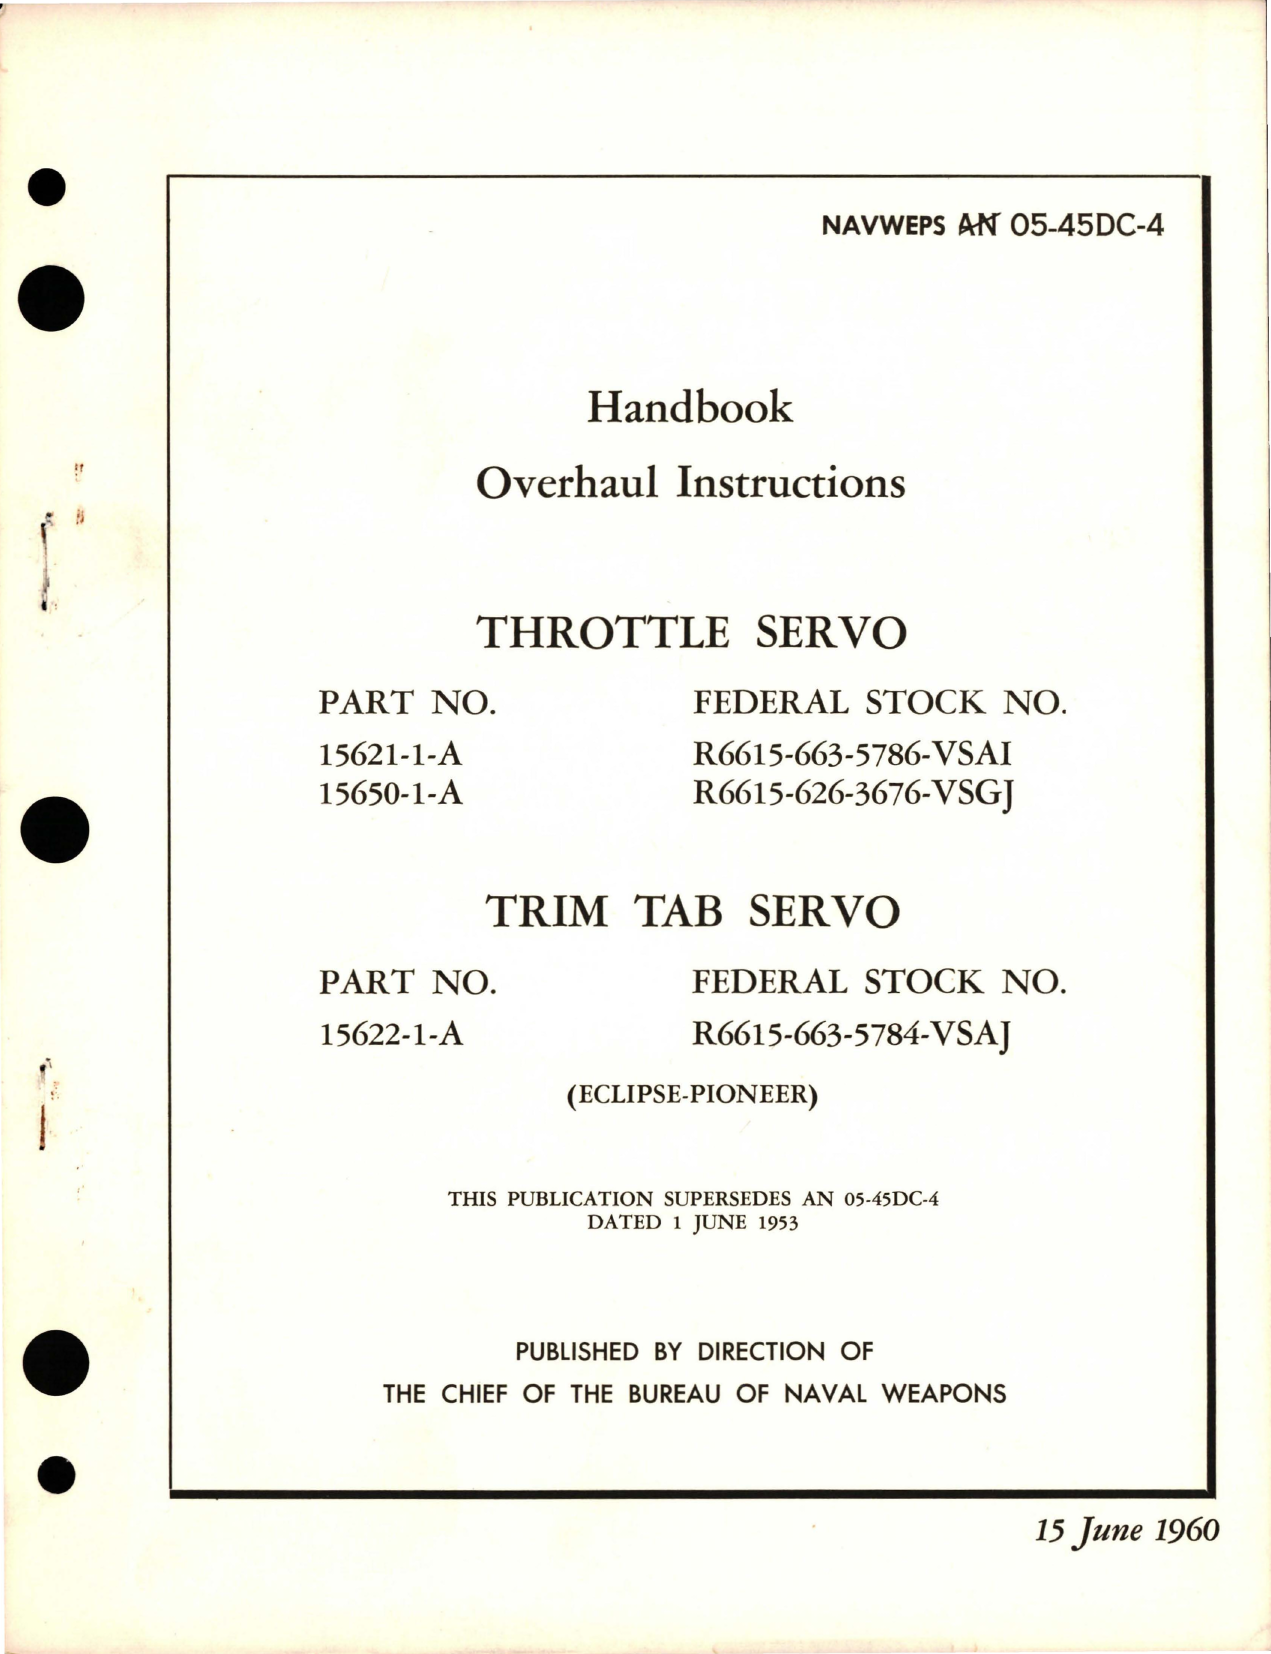 Sample page 1 from AirCorps Library document: Overhaul Instructions for Throttle Servo - Parts 15621-1-A, 15650-1-A and Trim Tab Servo - Part 15622-1-A